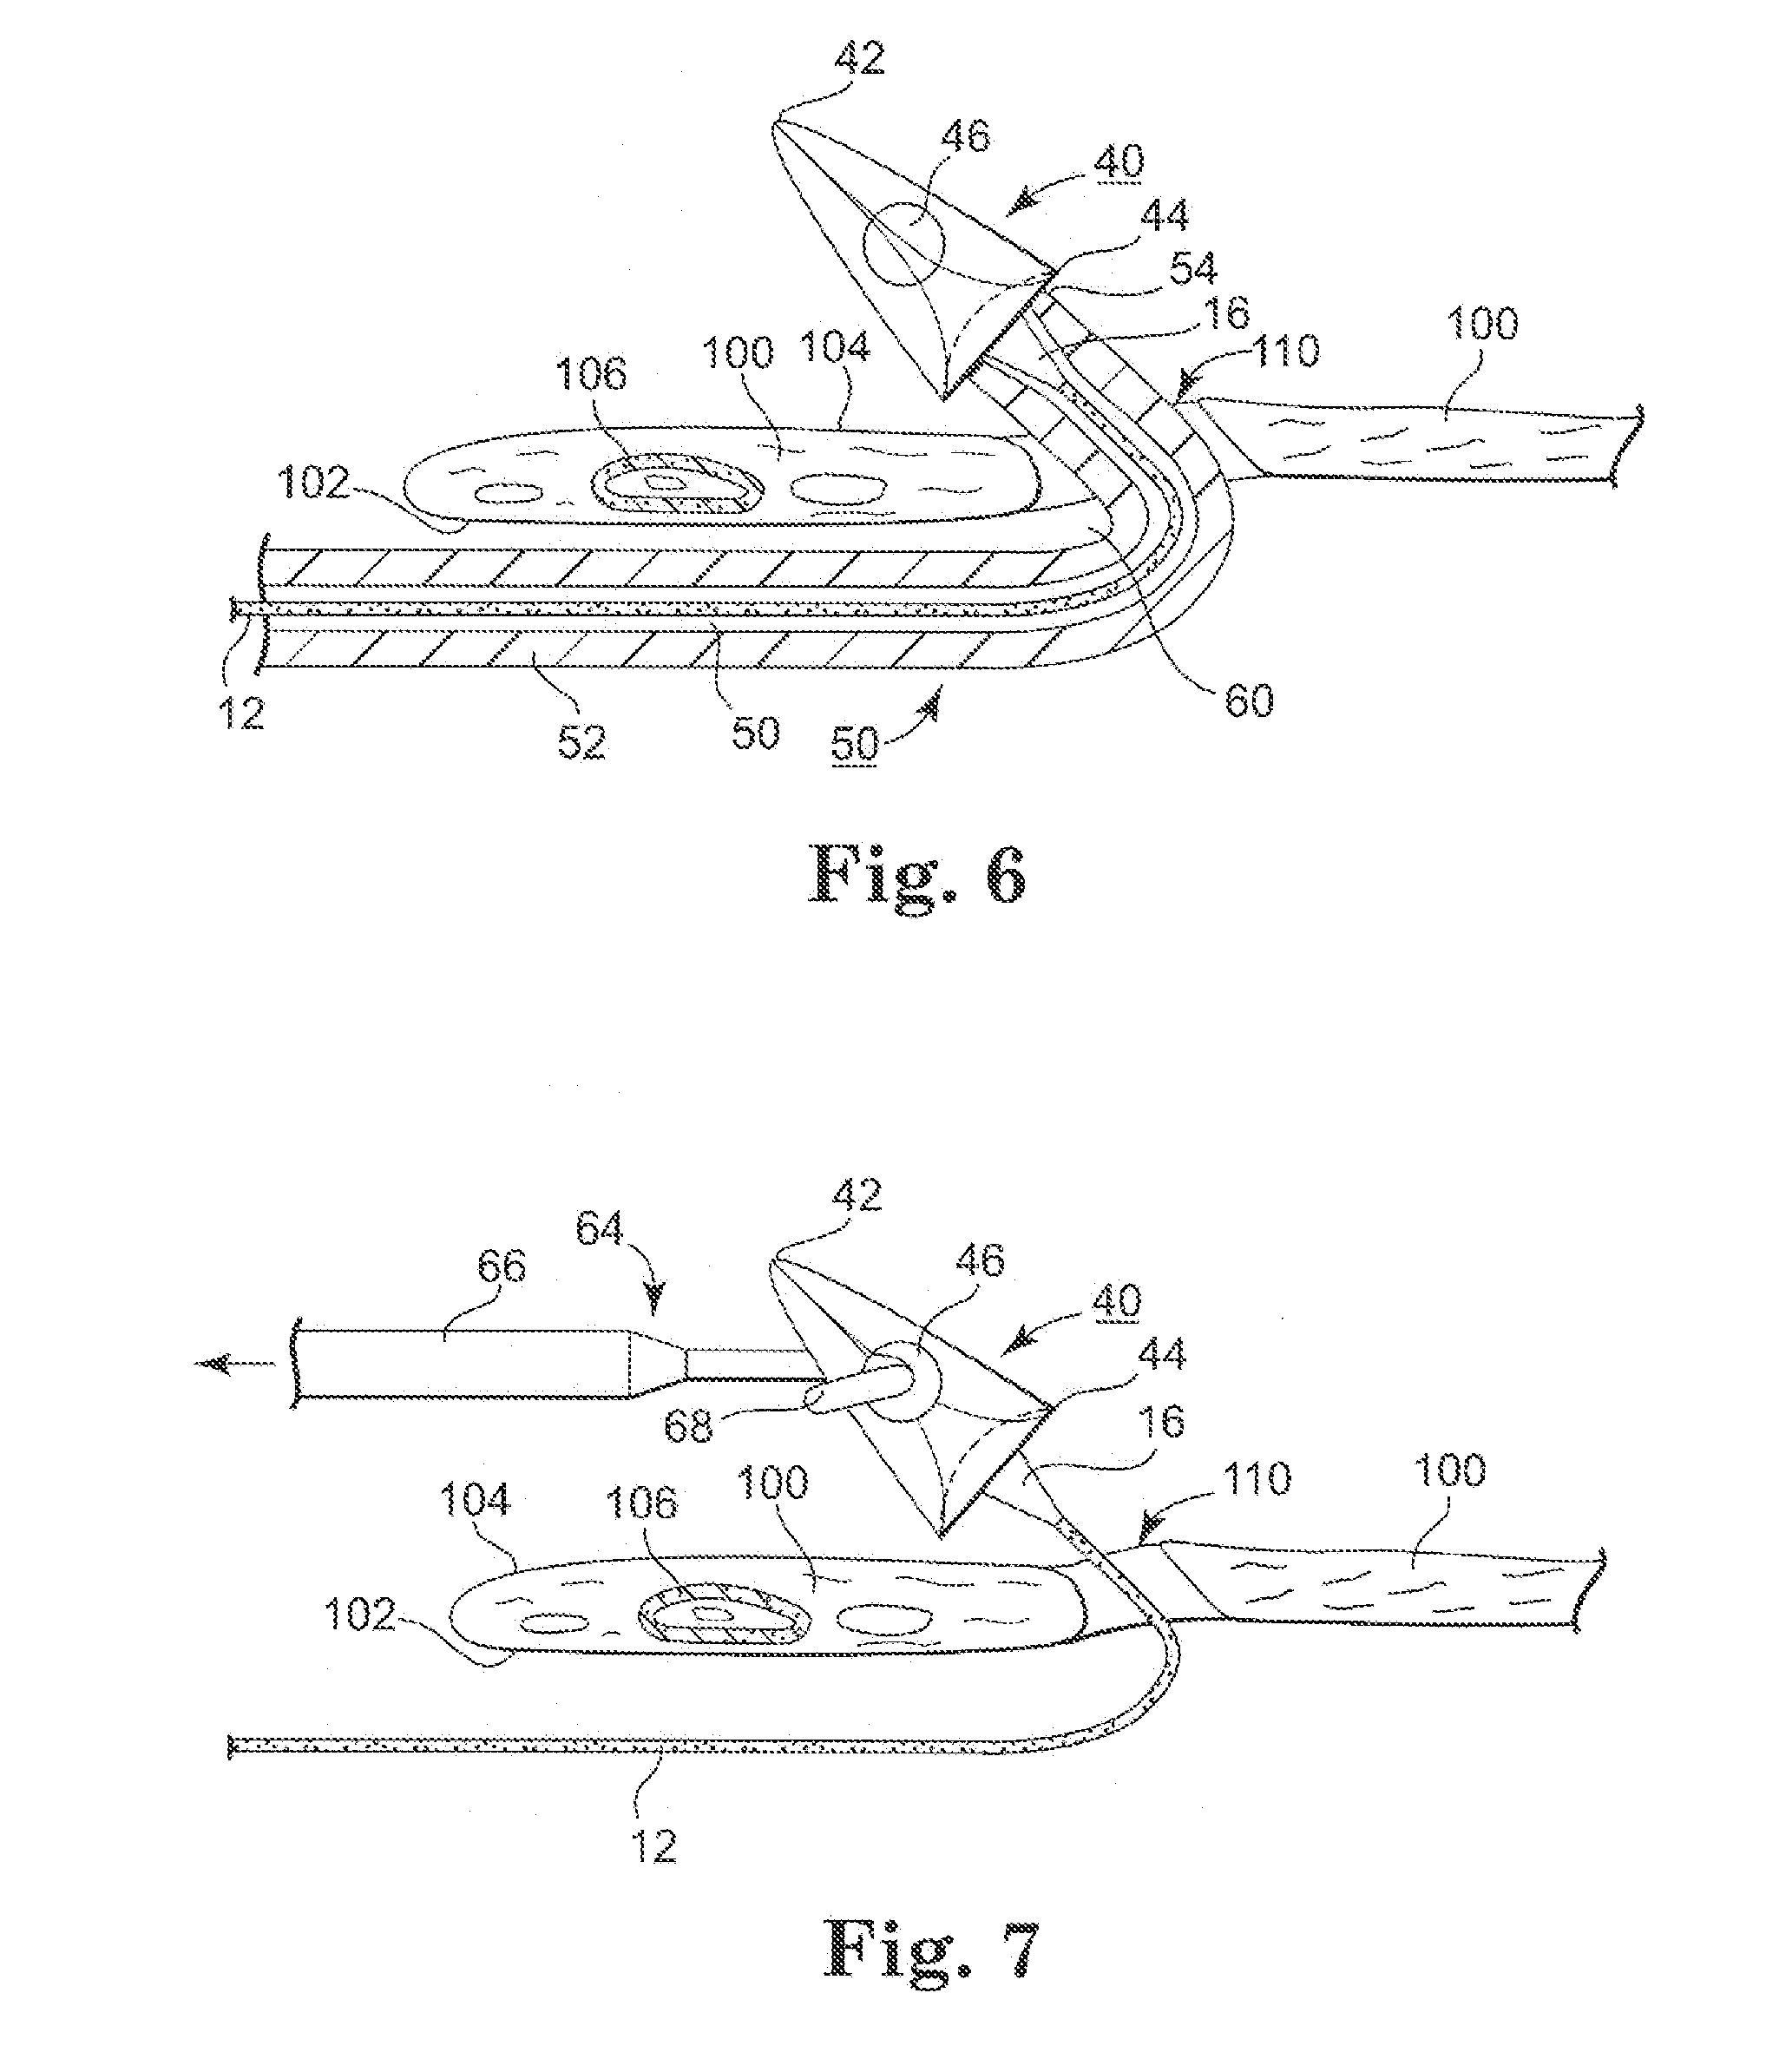 Minimally Invasive Methods and Apparatus for Accessing and Ligating Uterine Arteries with Sutures